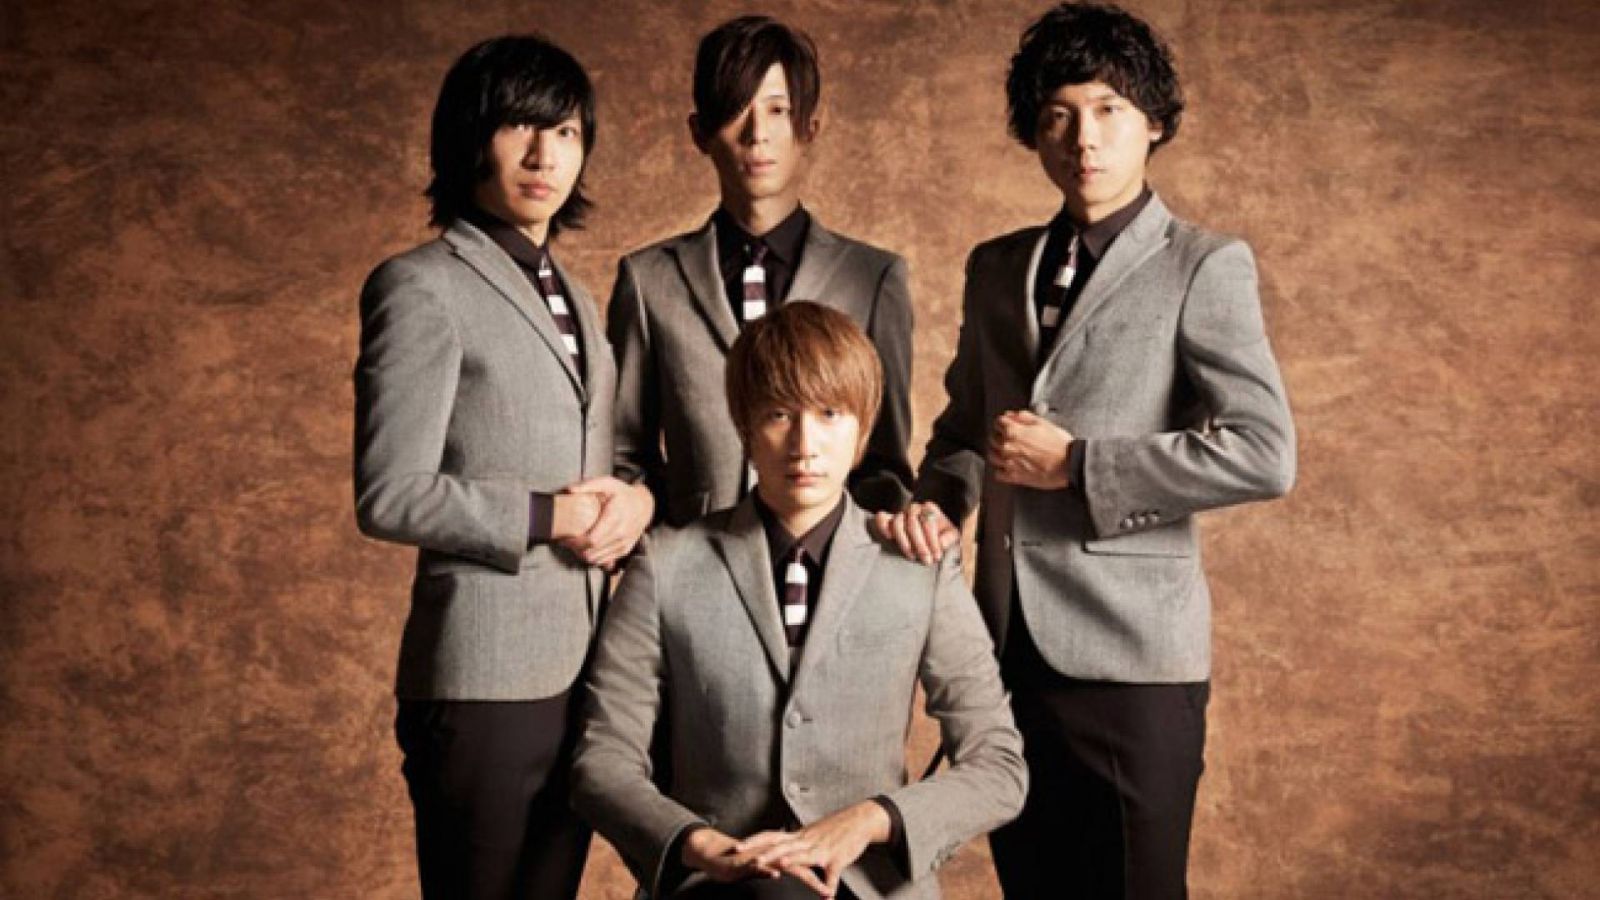 Interview avec THE BAWDIES © THE BAWDIES. All rights reserved.